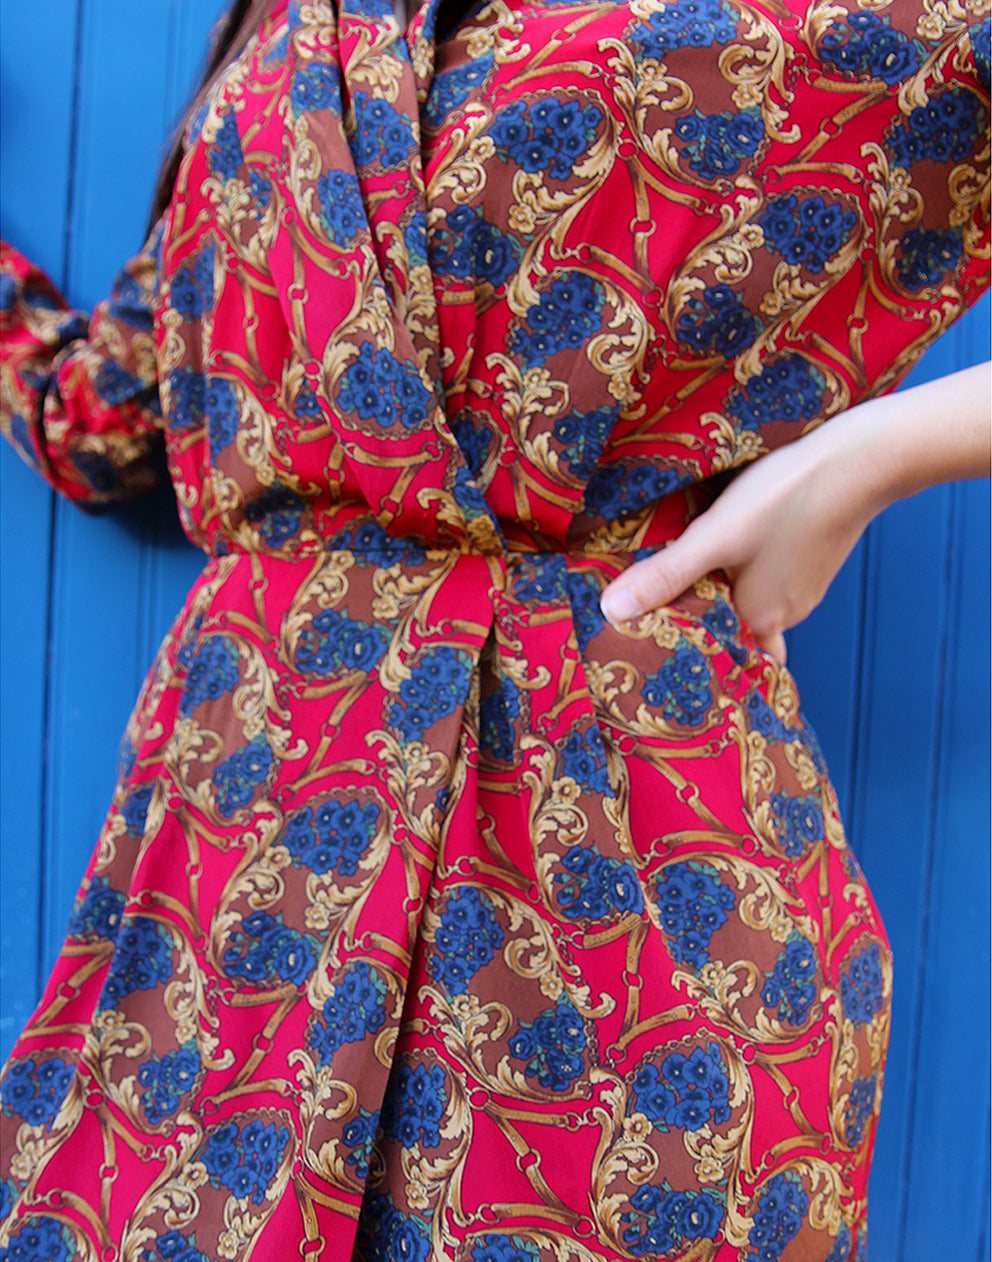 Printed Wrap Dress in Red